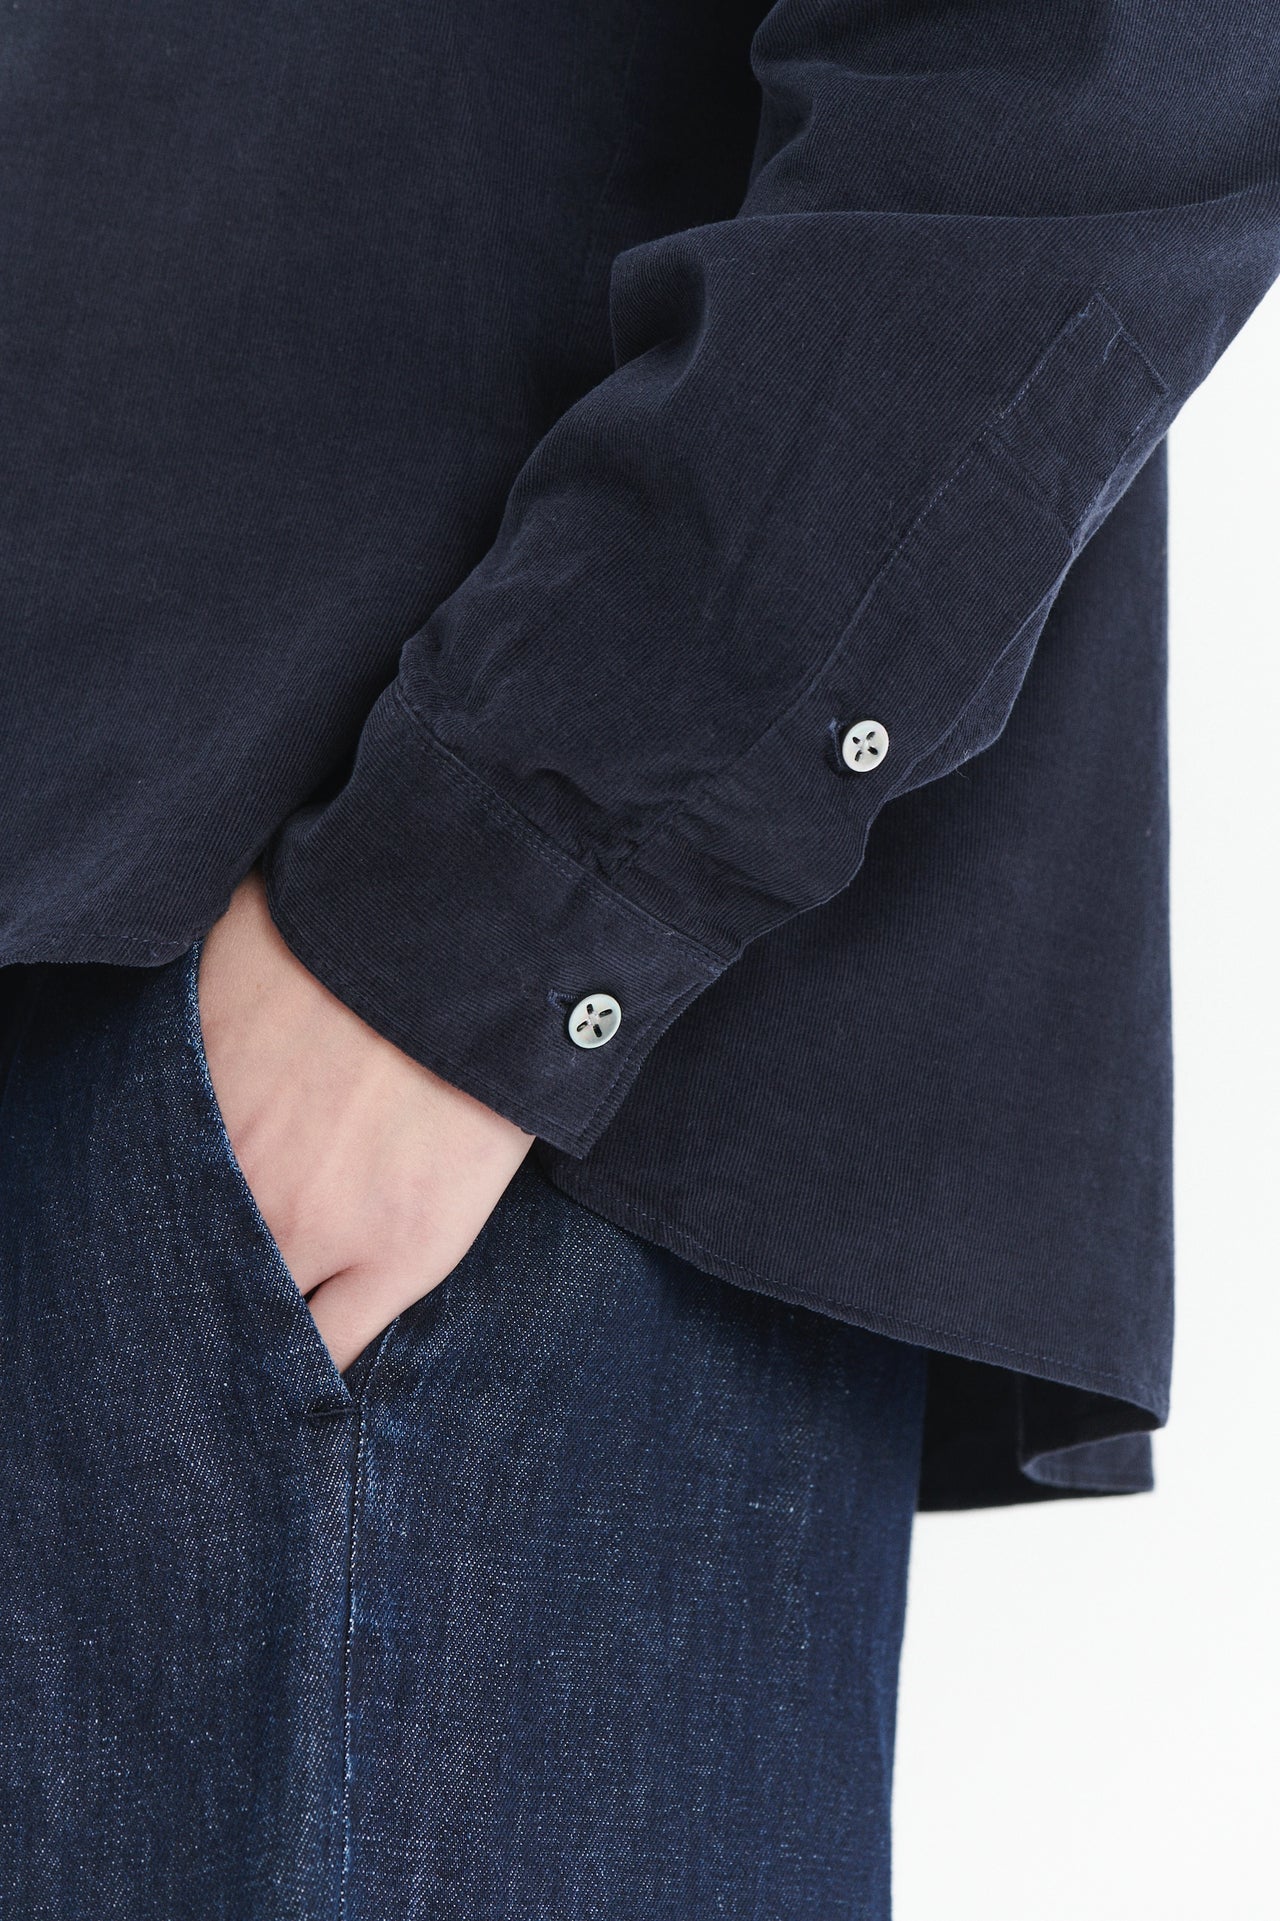 Relaxed Cropped Blouse in the Finest Navy Blue Japanese Corduroy Cotton